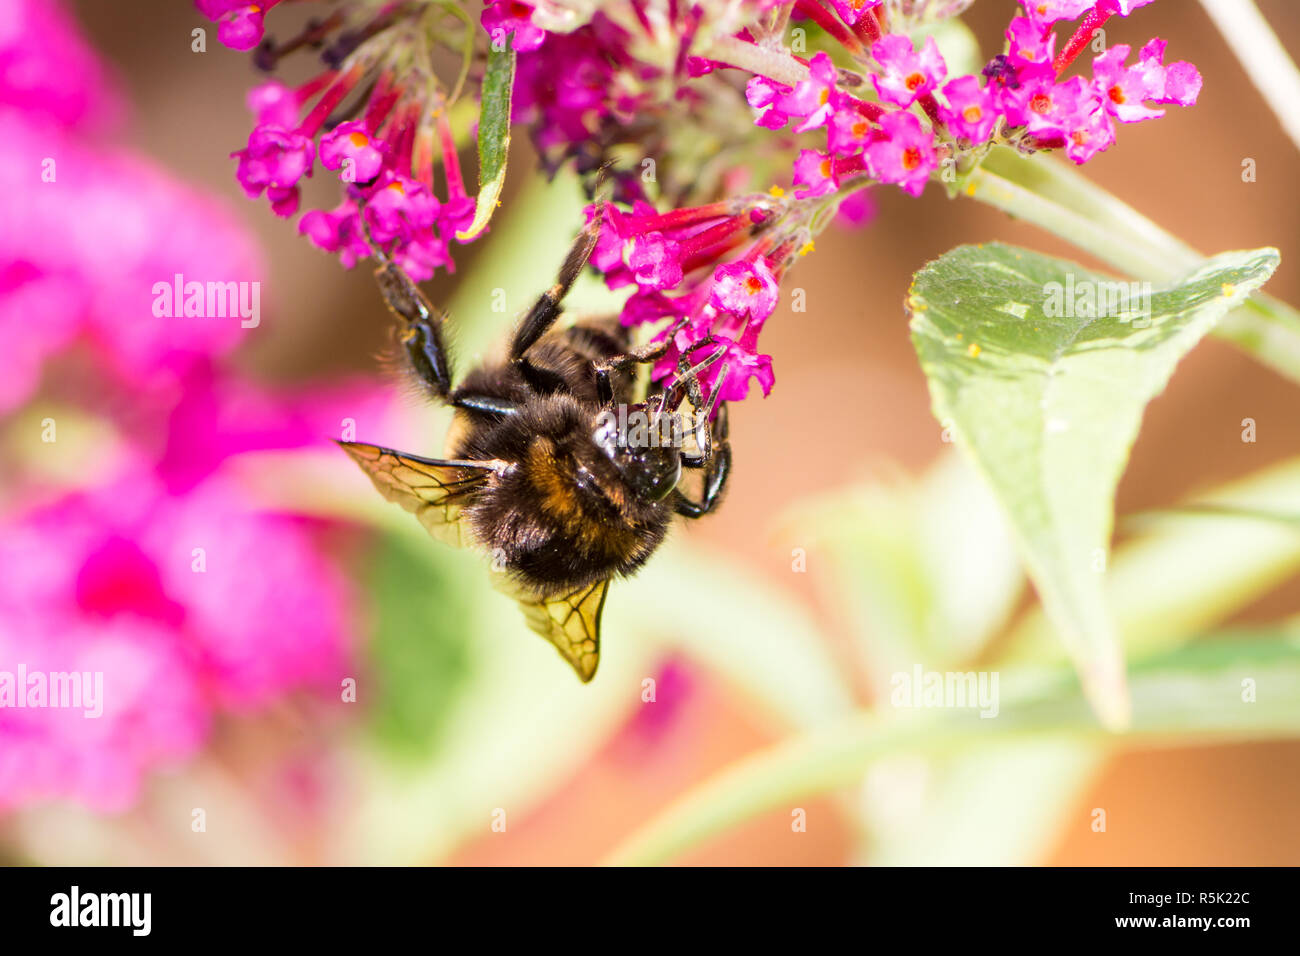 Bumblebee collecting nectar at a budleja blossom Stock Photo